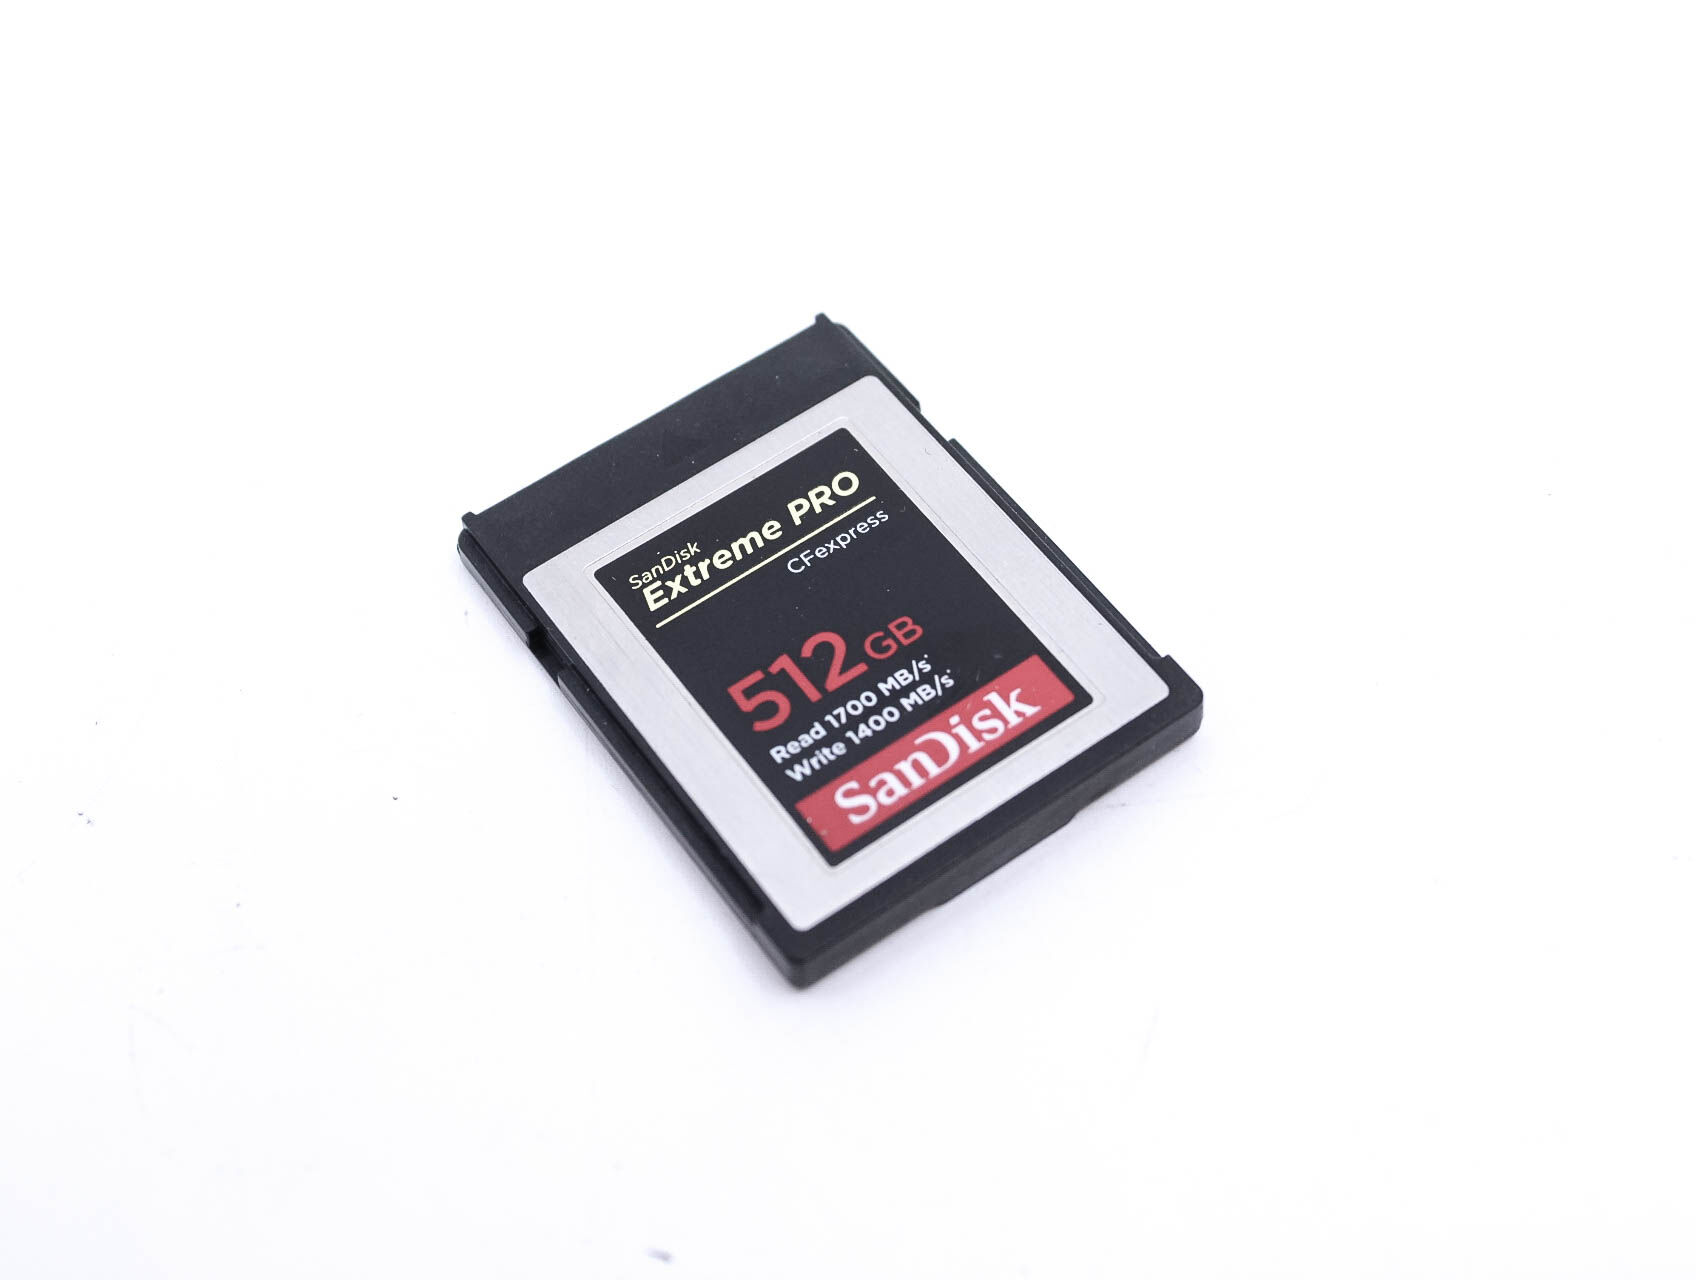 Used SanDisk 512GB Extreme PRO CFexpress Card Type B